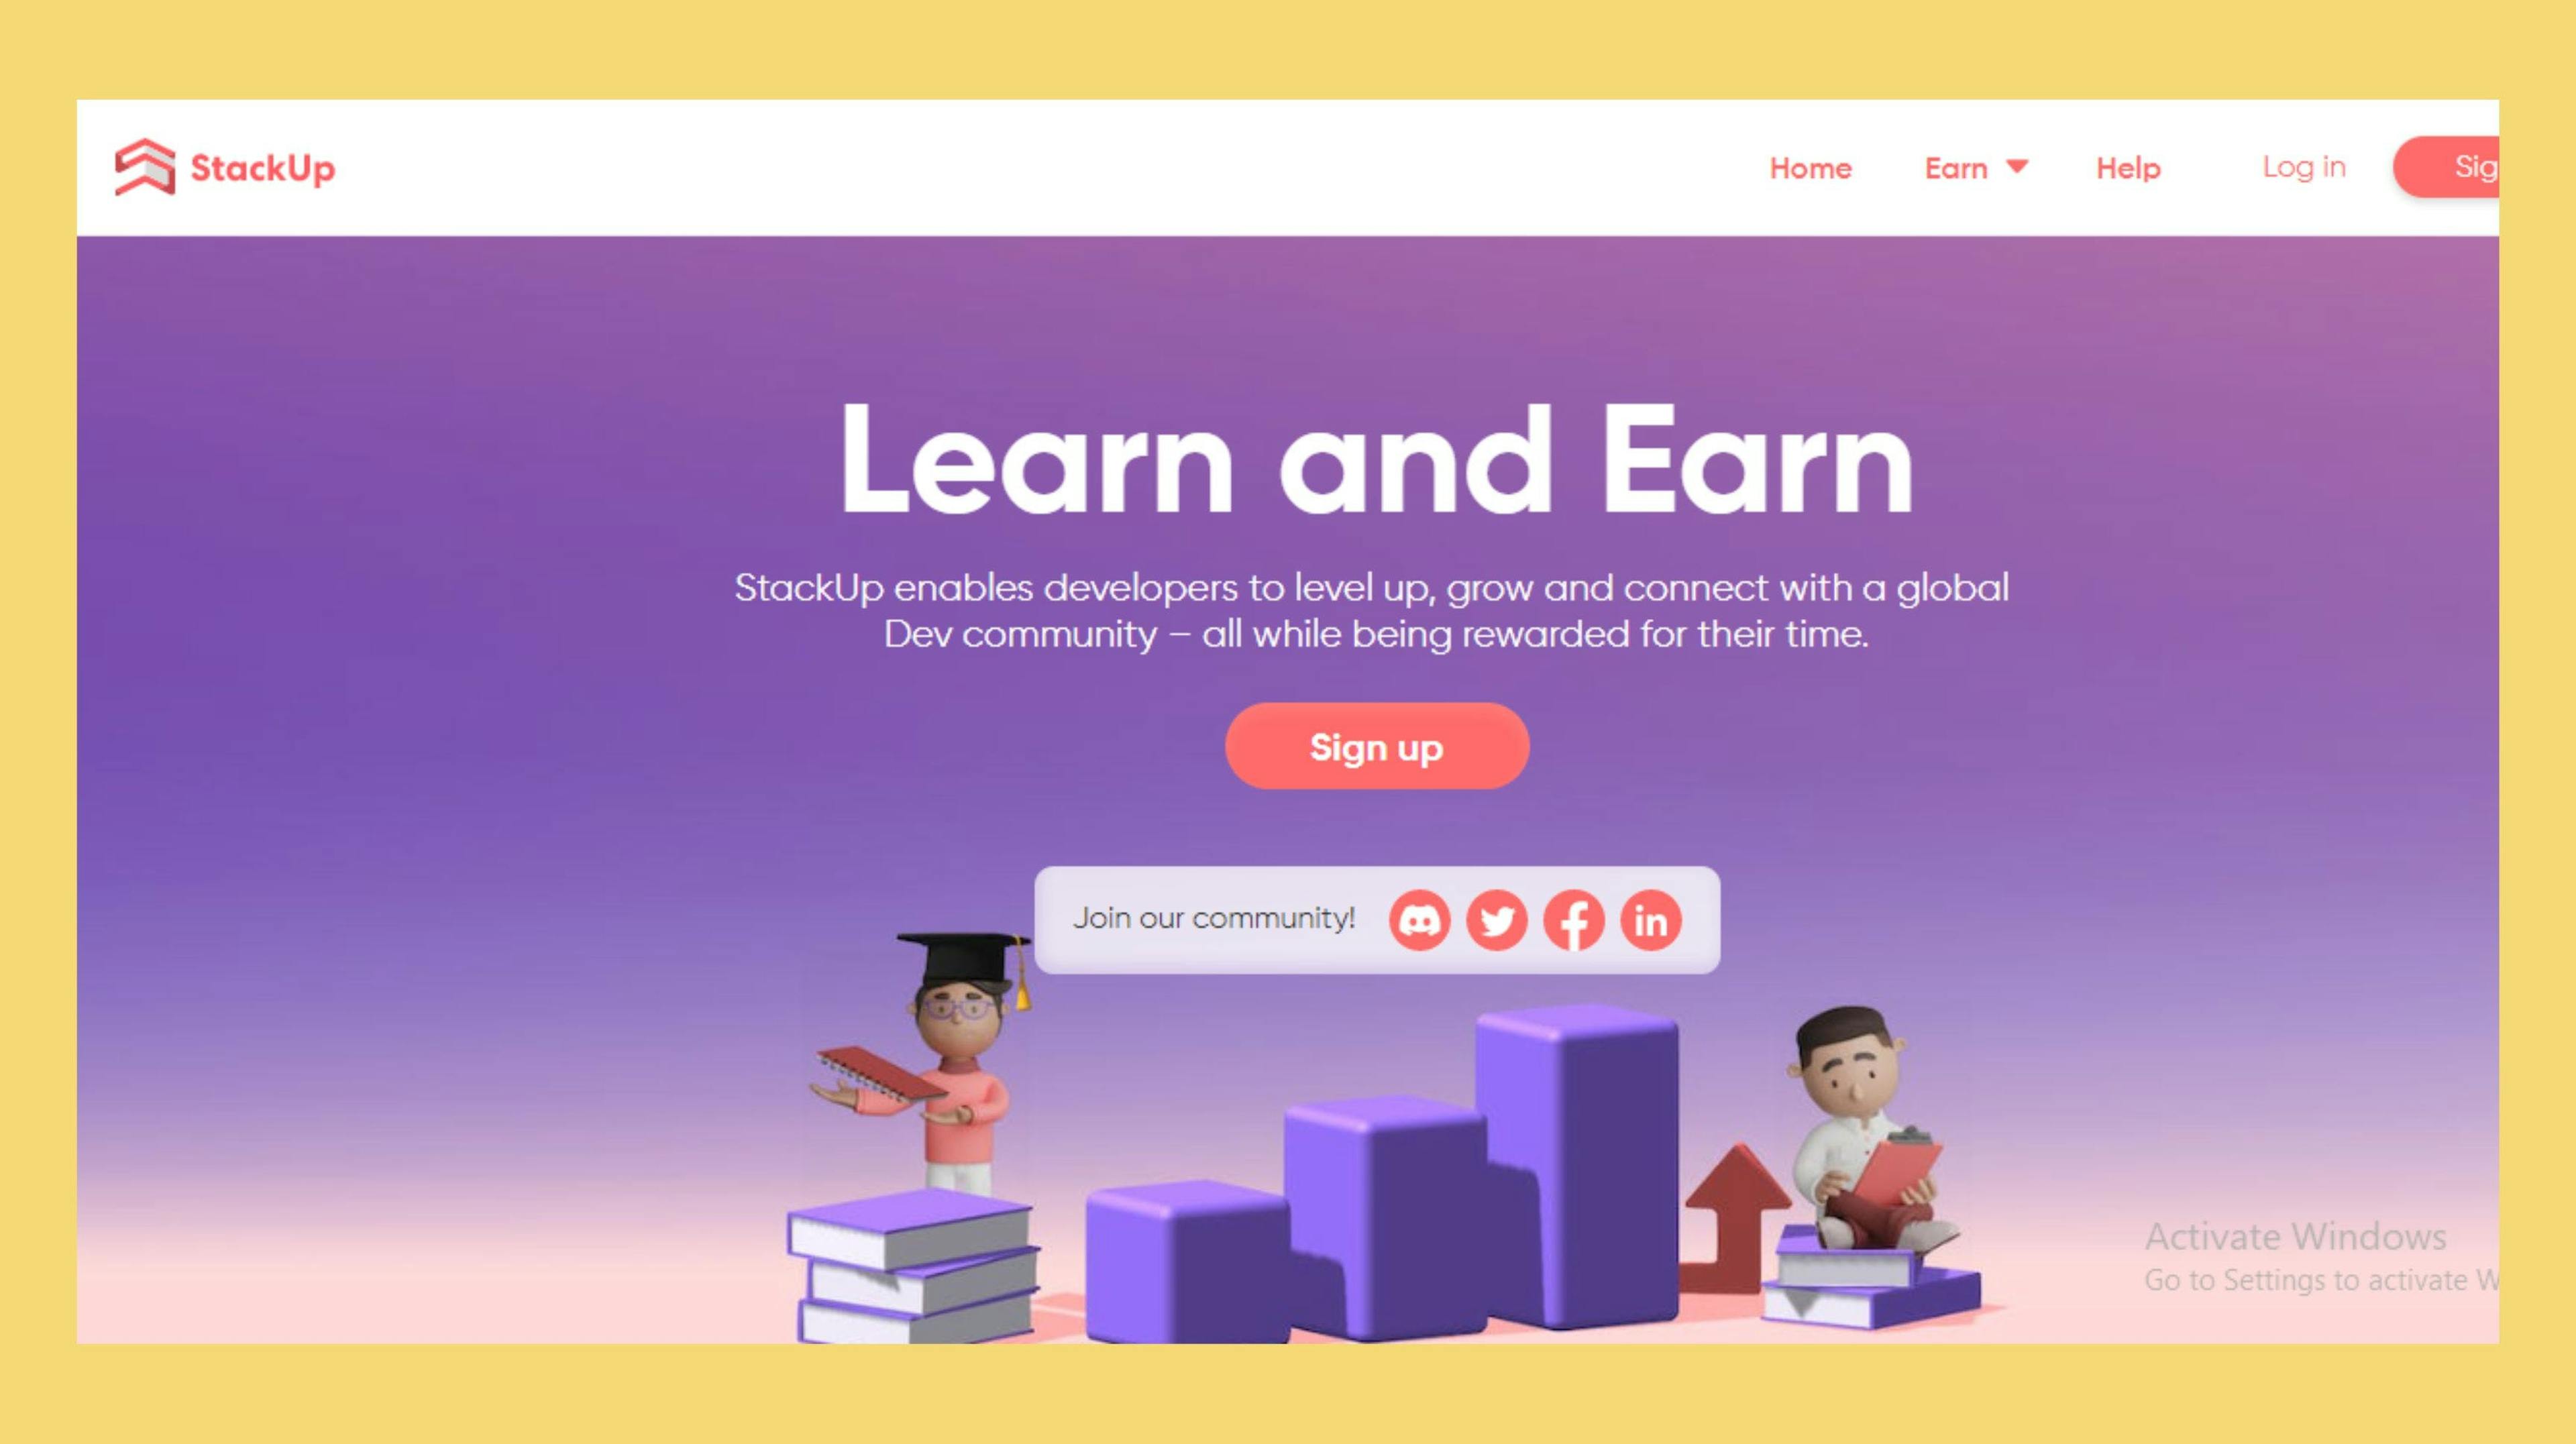 Learn and earn from StackUp